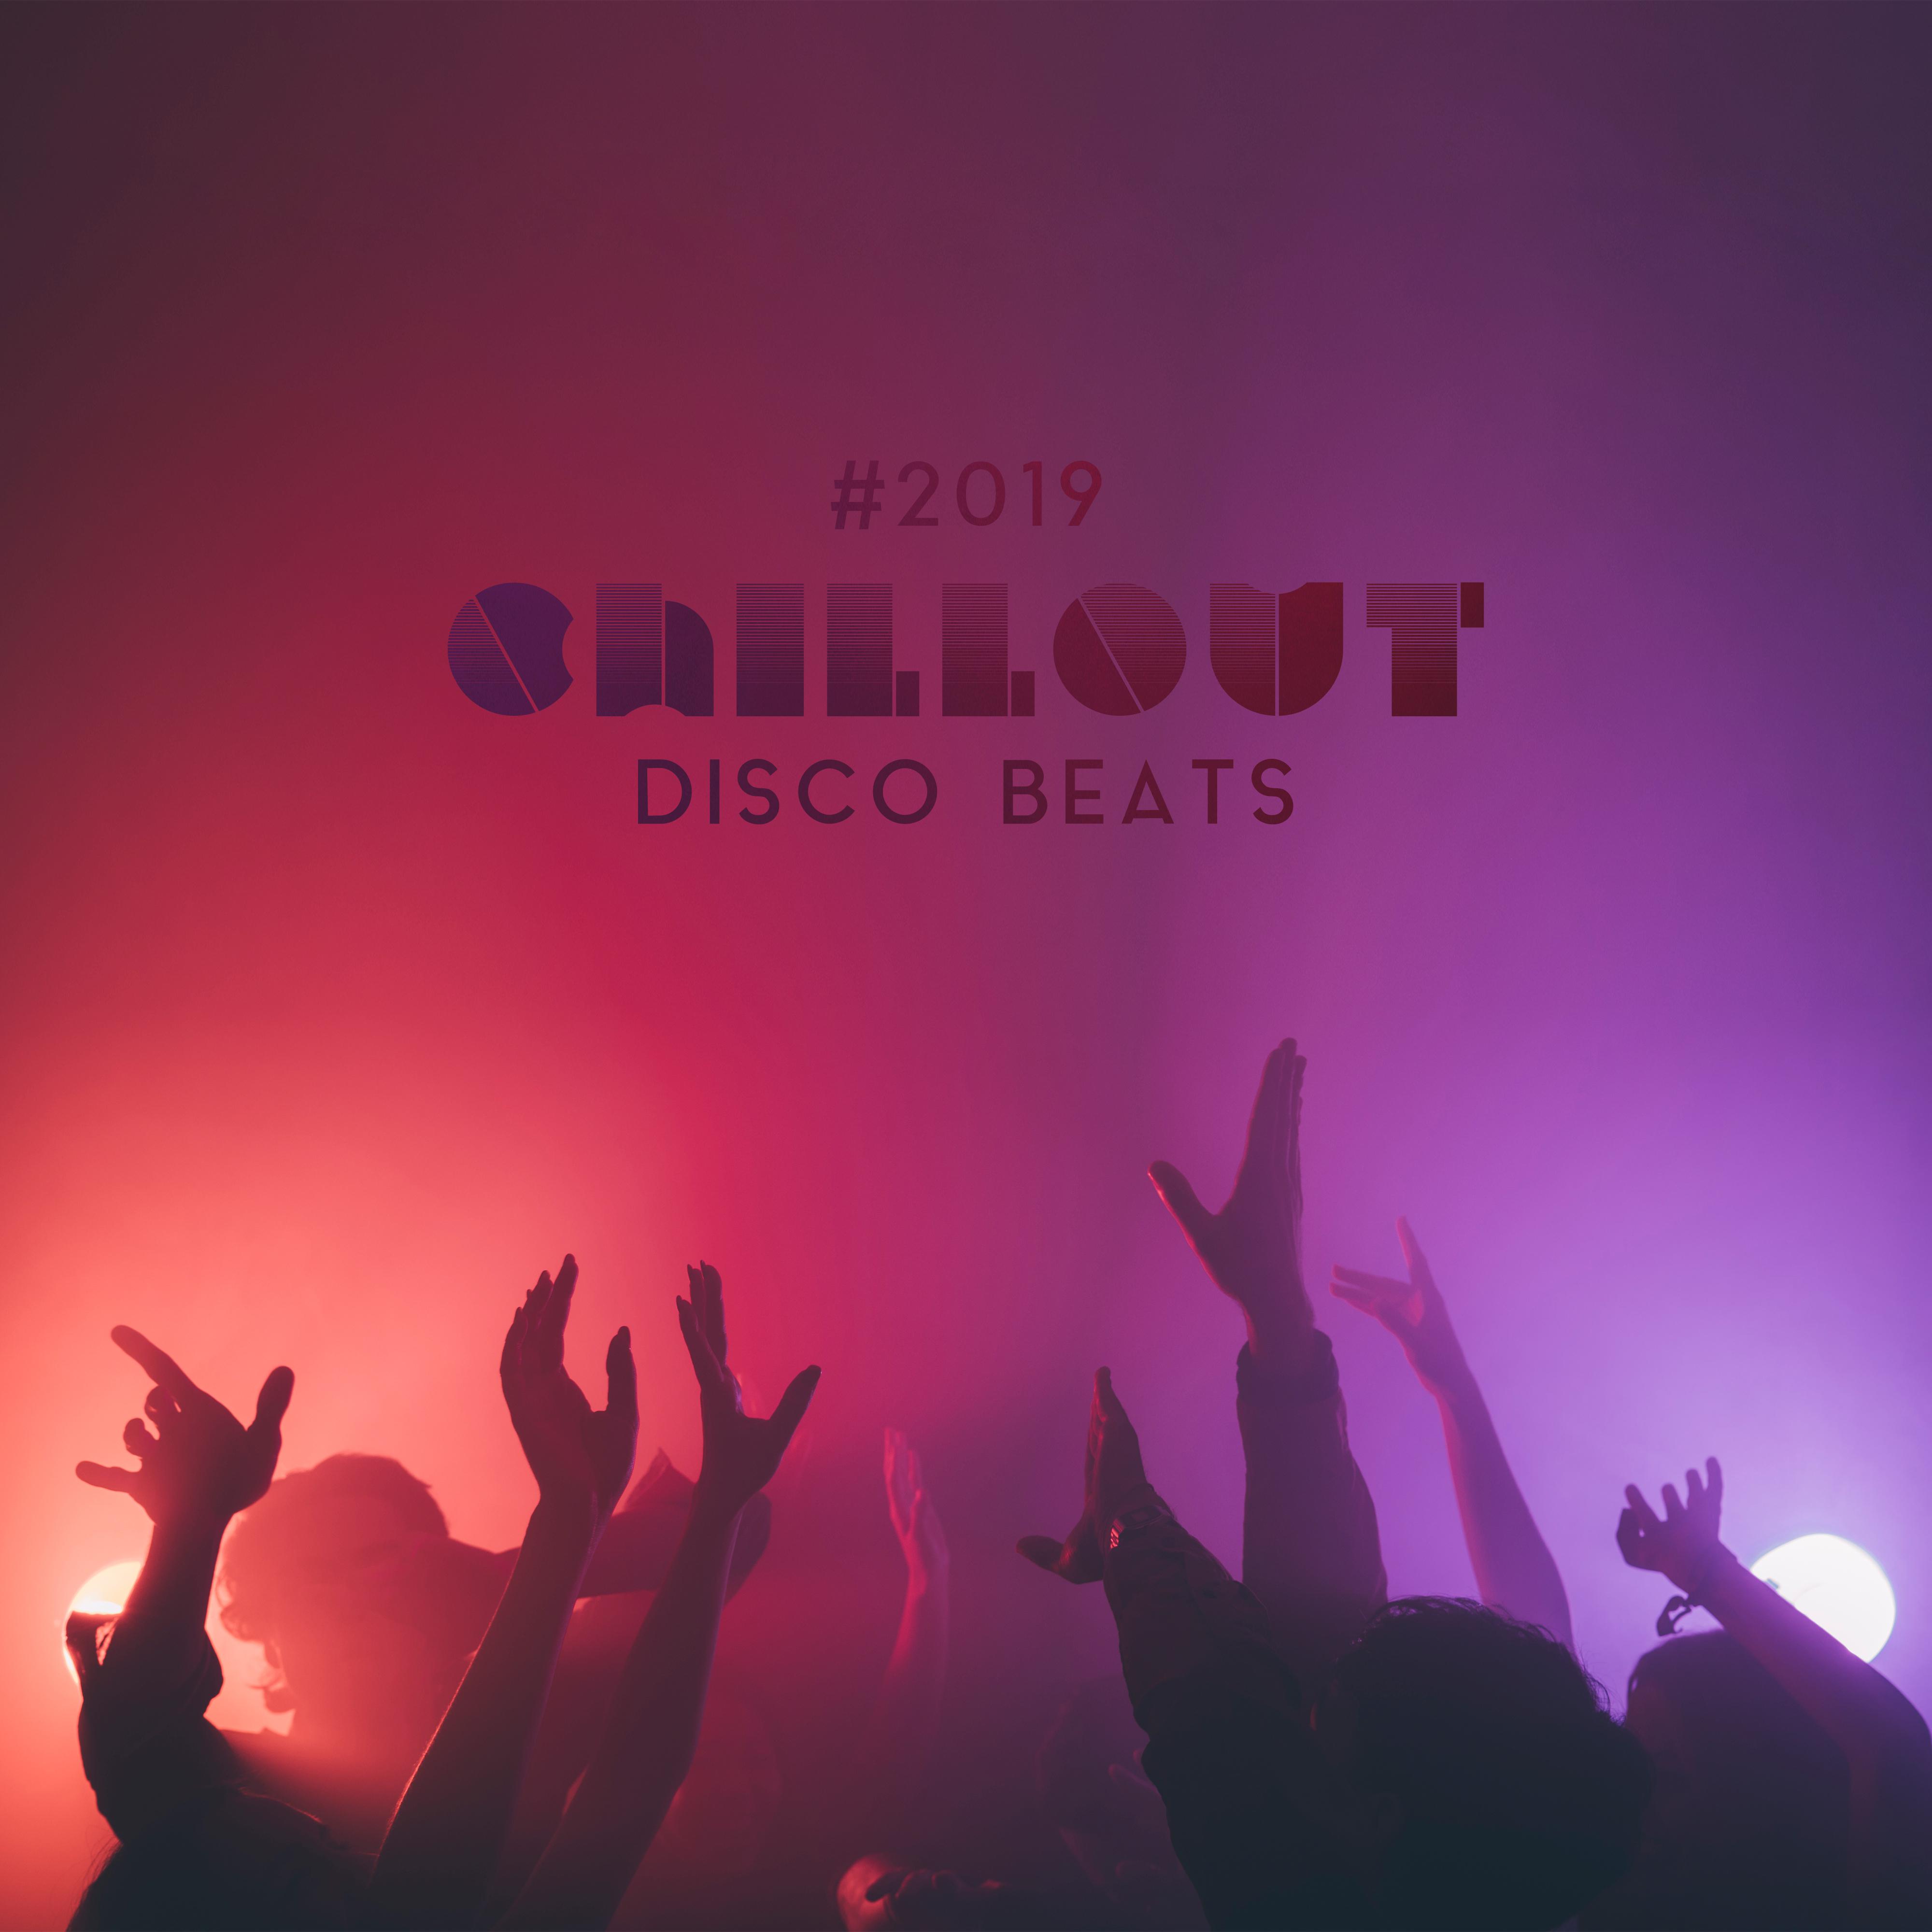 #2019 Chillout Disco Beats: Best Tunes from Ibiza, Chillout Set for the Party, Music for the Summer of 2019